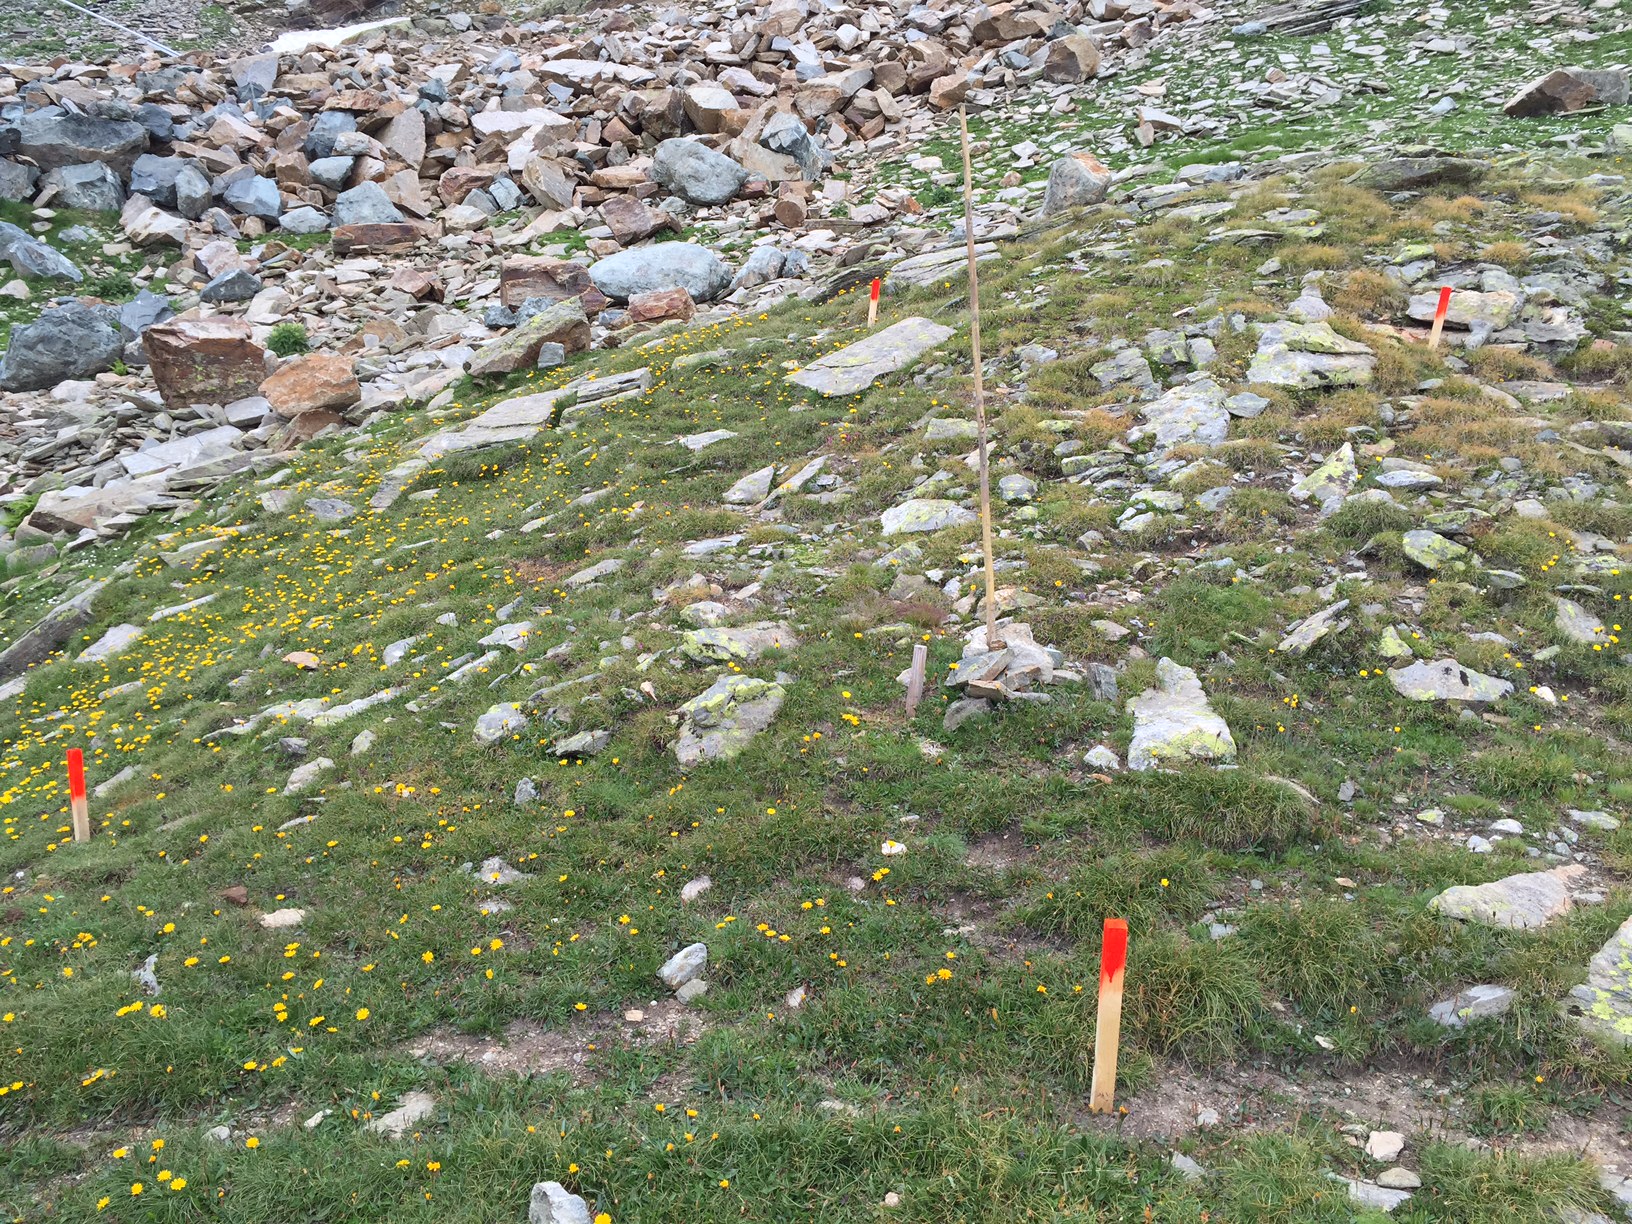 One of the research plots in the alpine tundra